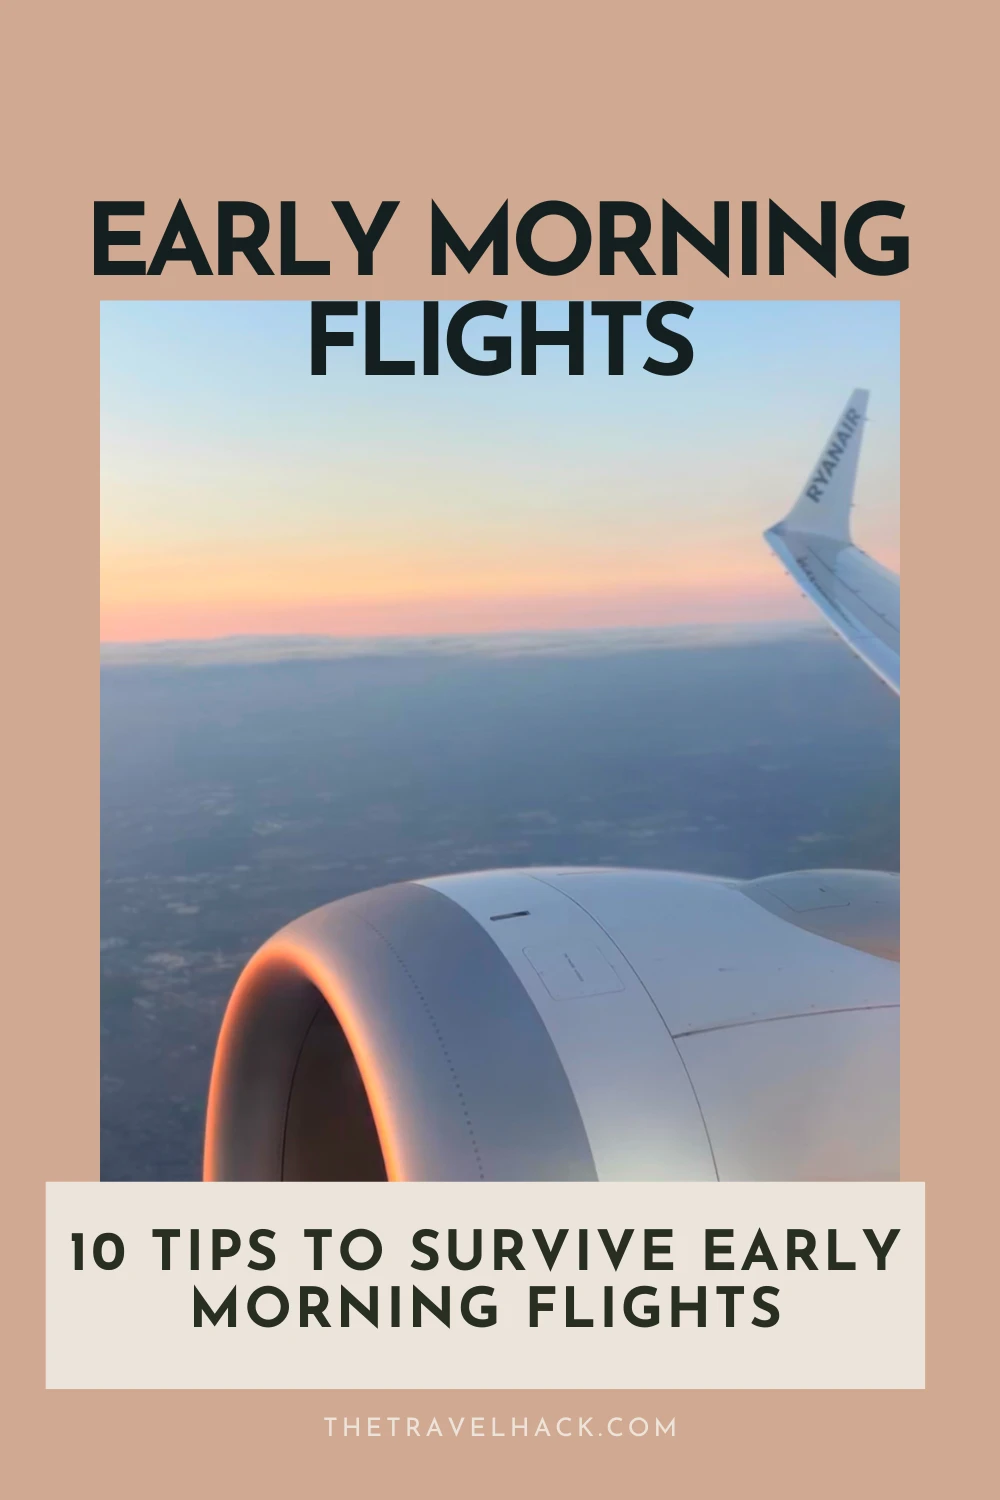 10 travel hacks to survive early morning flights